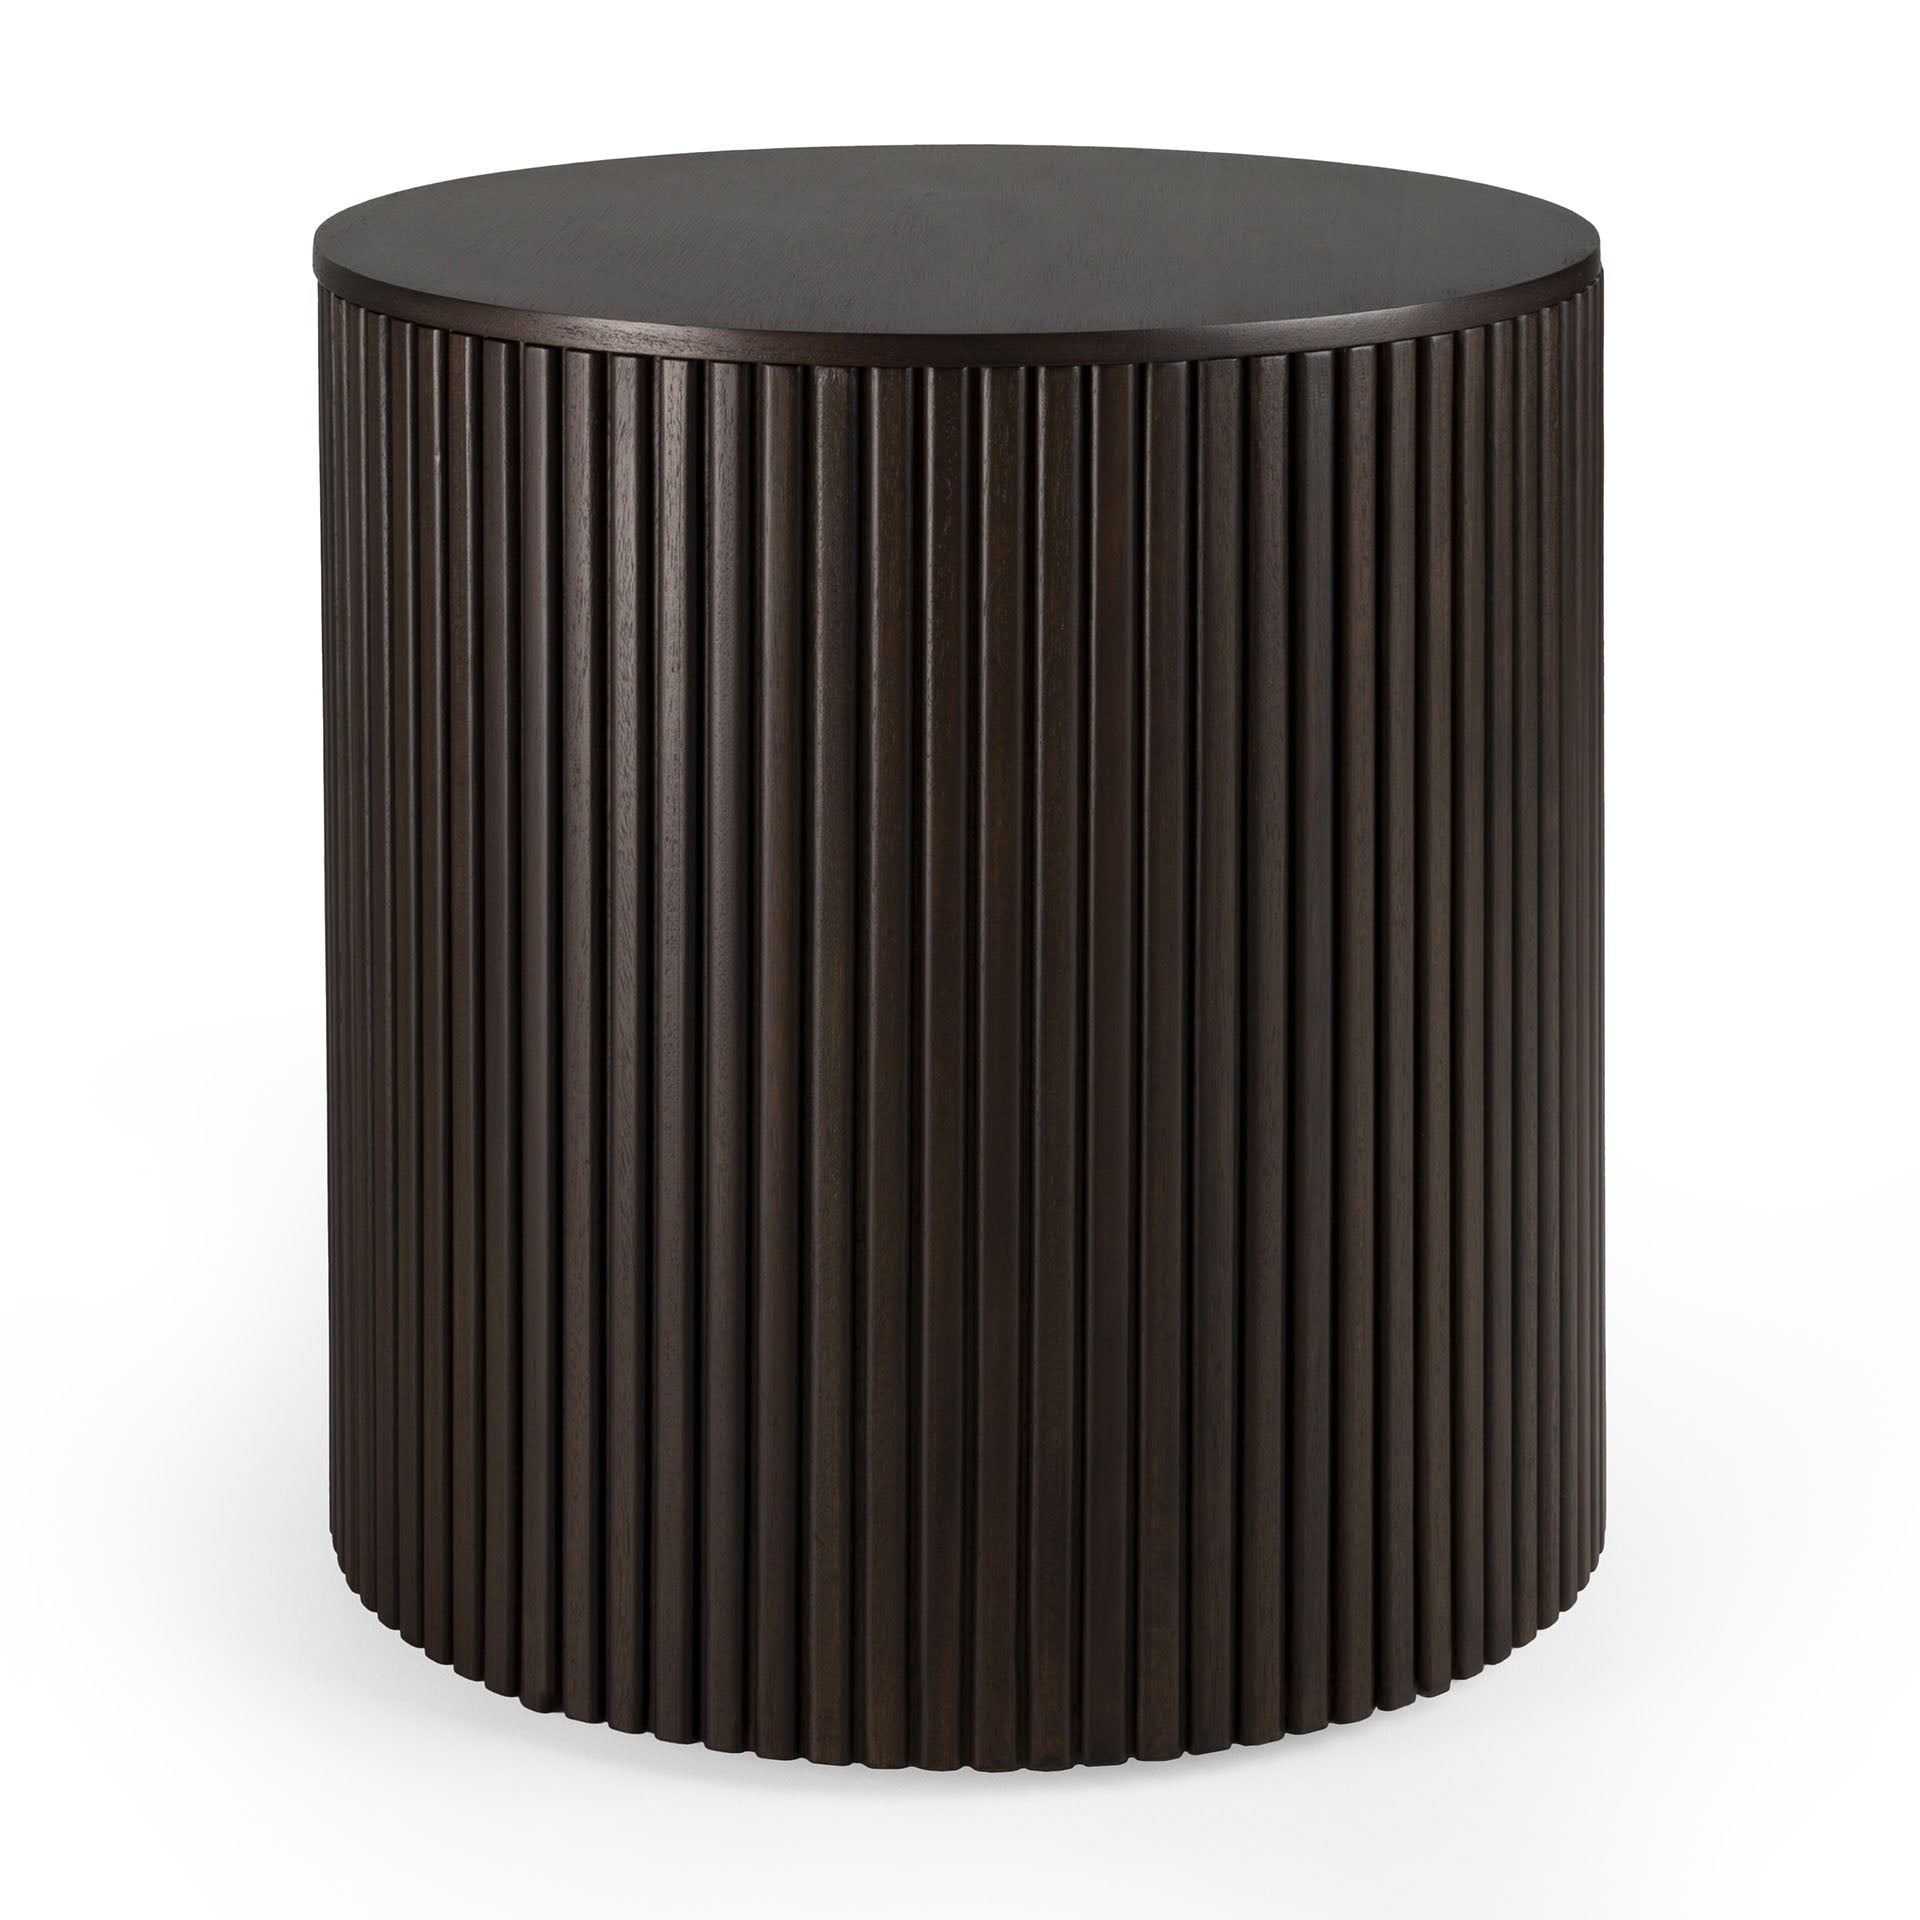 Ethnicraft Roller Max Round Side Table